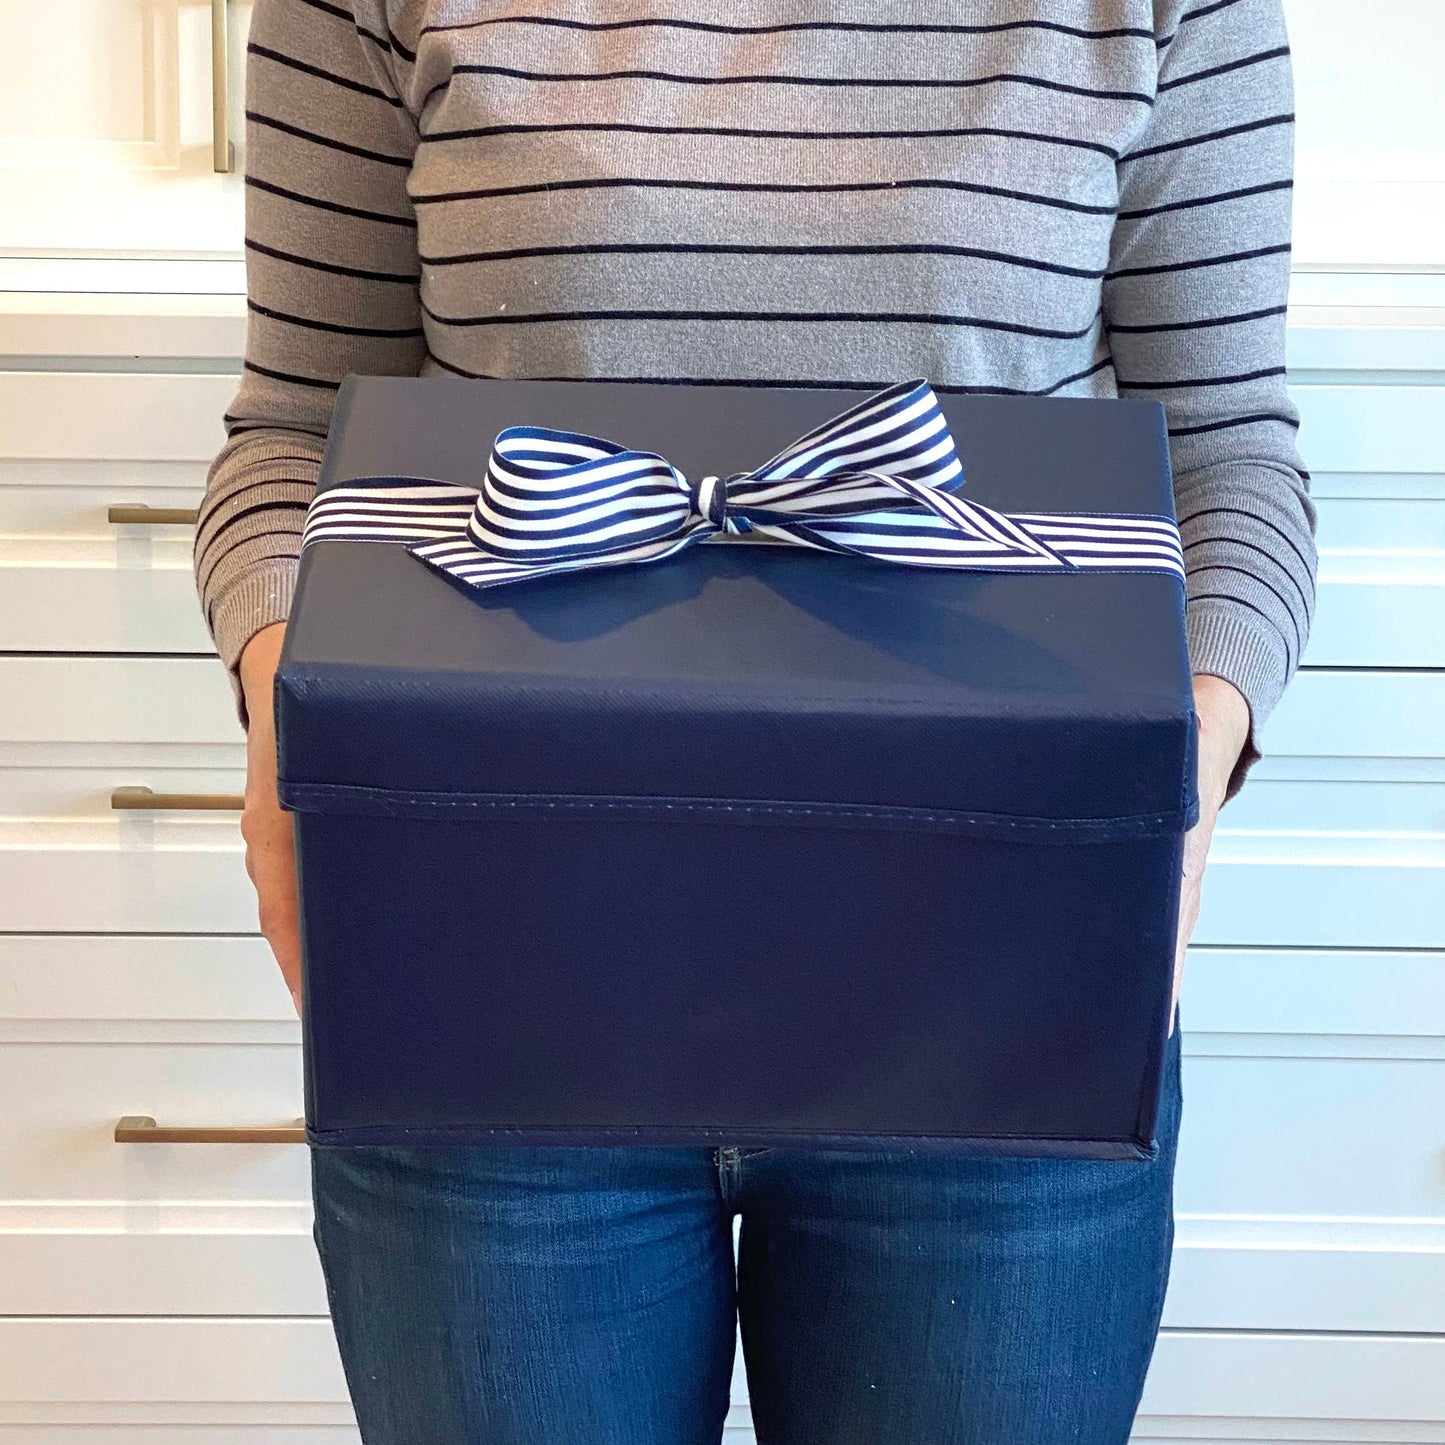 WHOLESALE QTY 15 Small Shoebox-Sized Blue Collapsible Gift Box with ribbon attached, great zero waste solution for sustainable and eco-friendly gift boxes